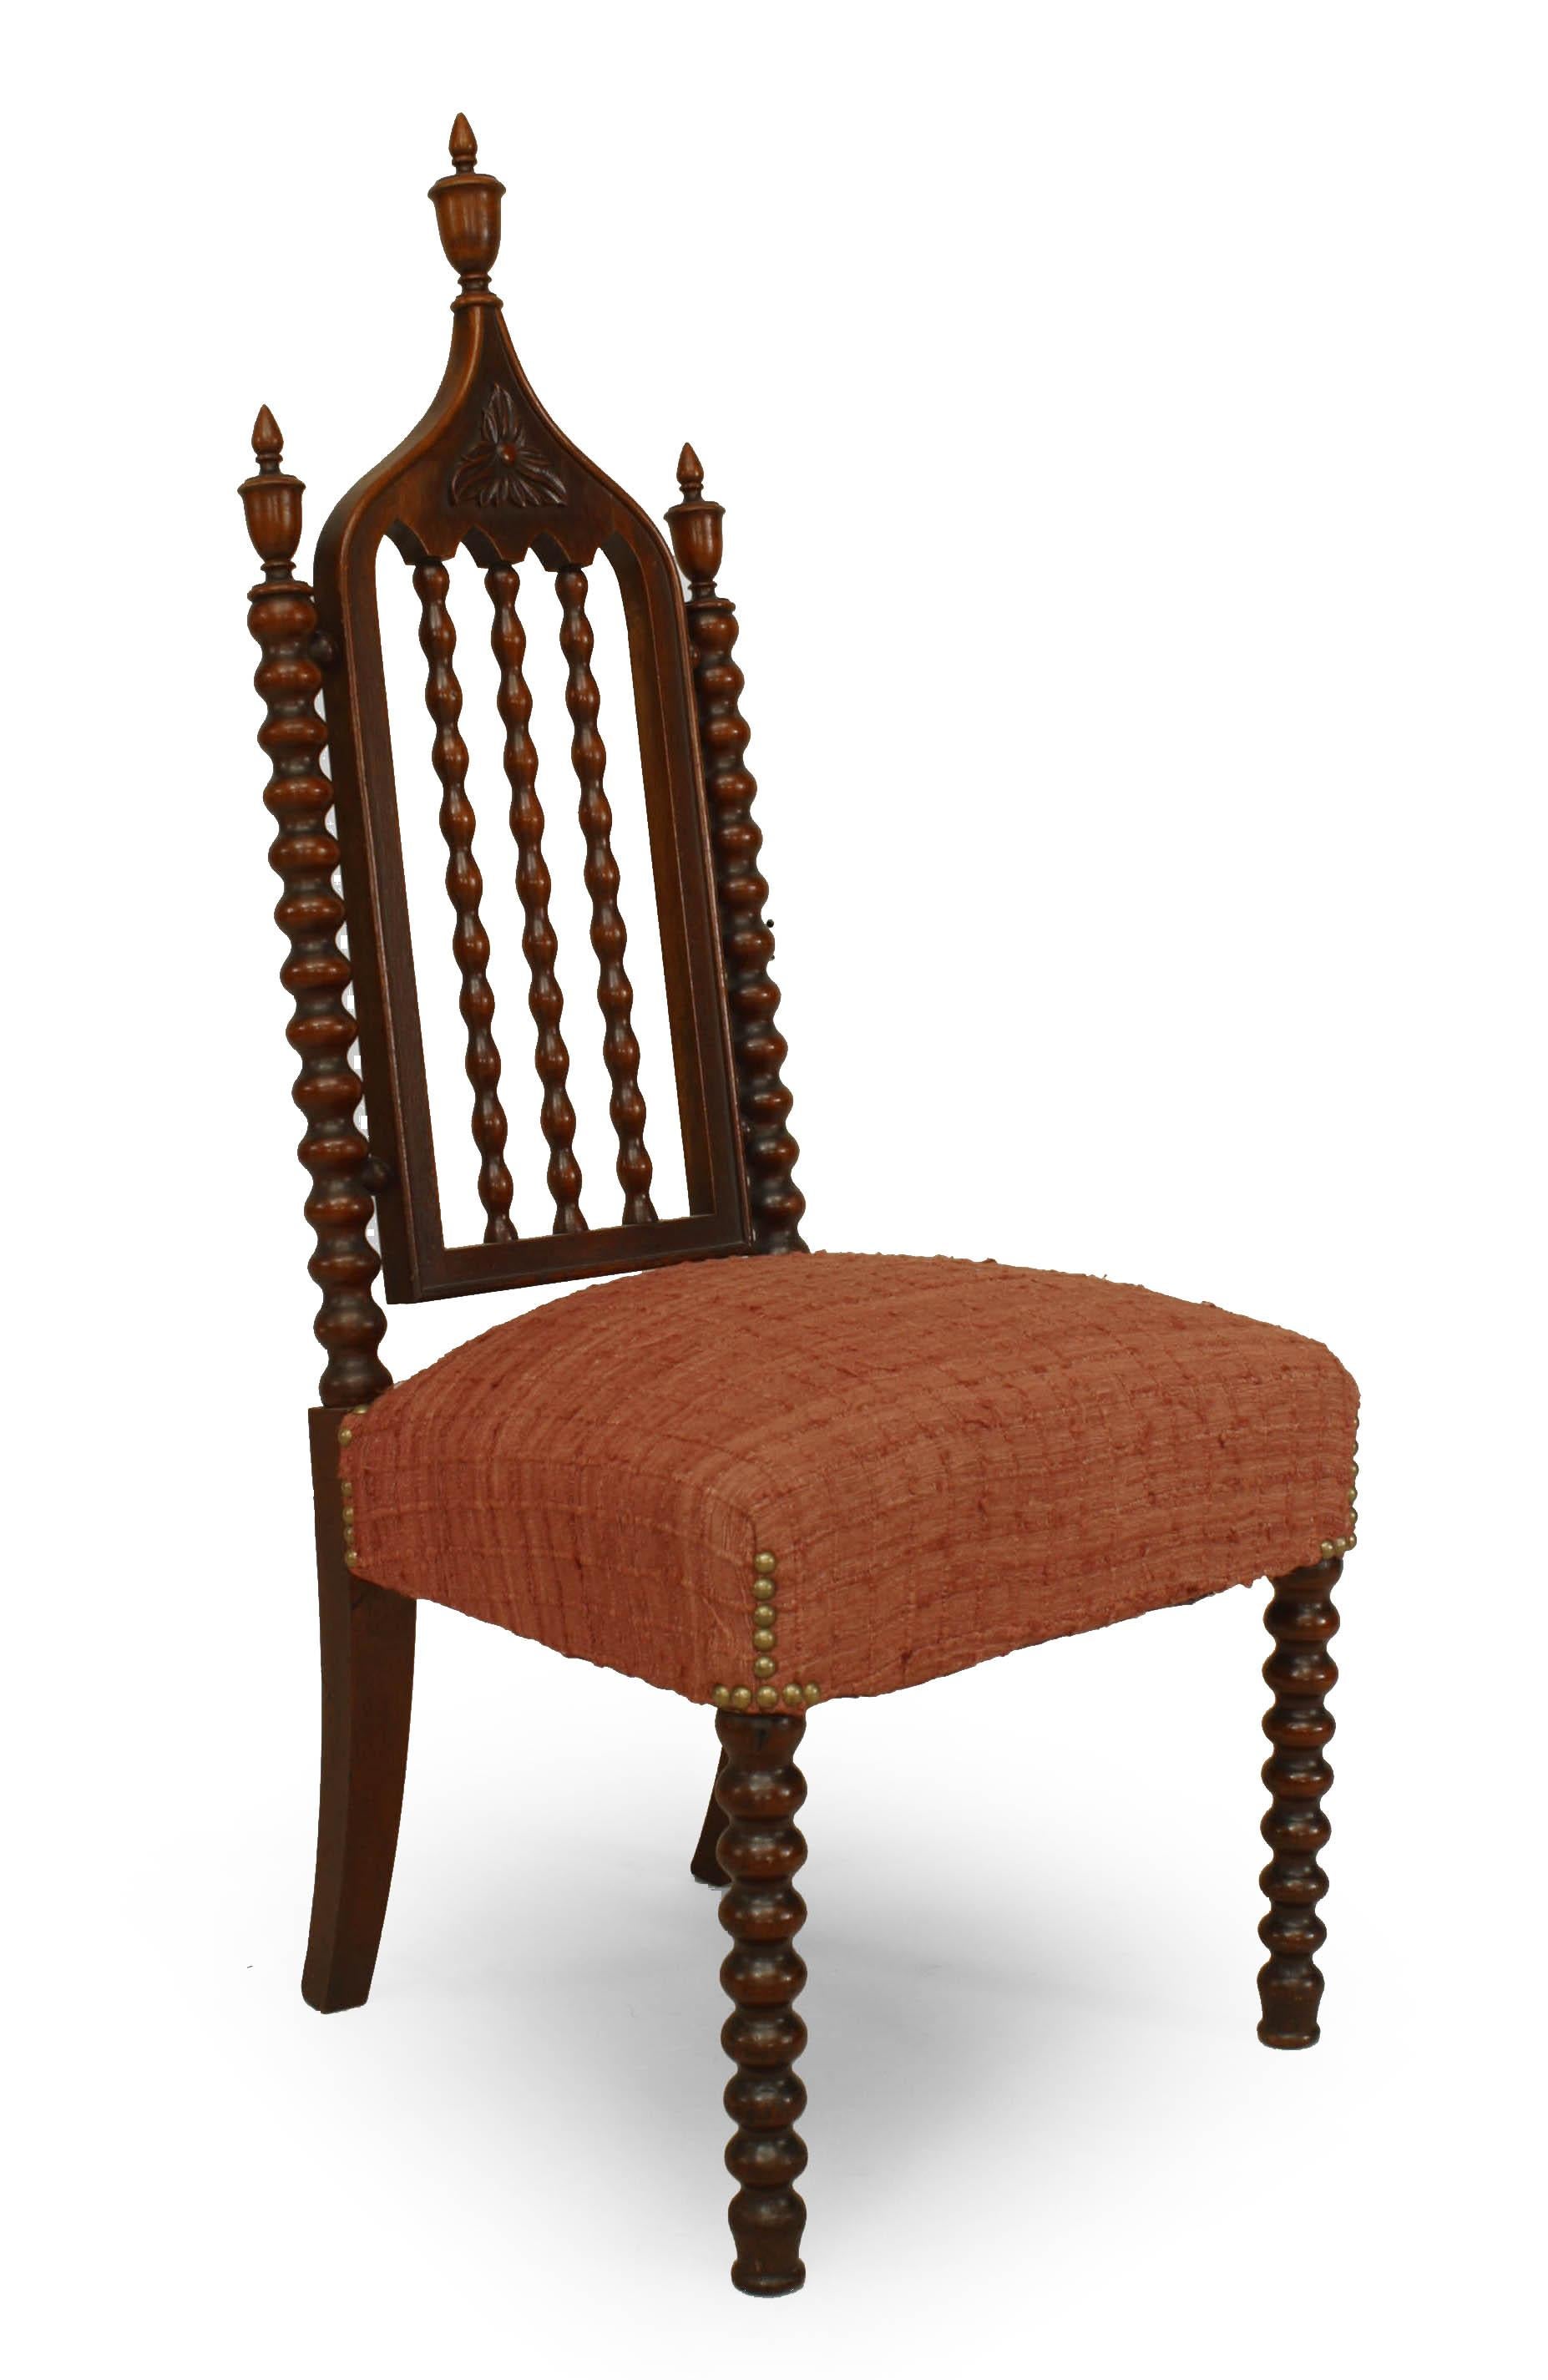 19th Century American Gothic Revival Mahogany Side Chairs For Sale